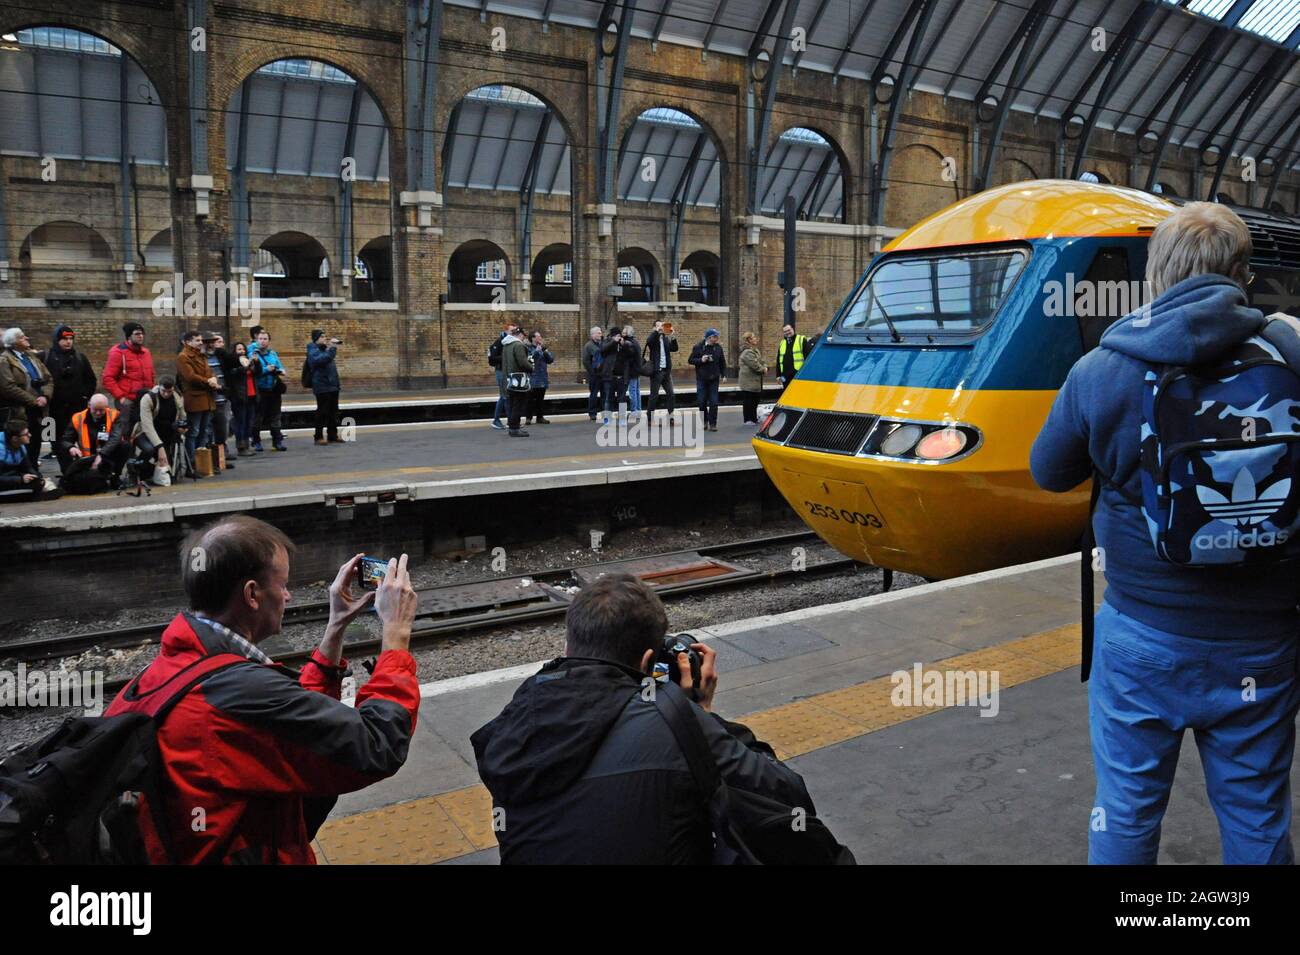 King's Cross Station, London, UK. 21st December 2019. London North Eastern Railway Company restored an InterCity 125 set to its original British Rail livery for a special four-day tour around the LNER network as the trains end 40 years of service on the East Coast Main Line. Over 200 enthusiasts gathered at Kings Cross Station for the end of the tour. G.P. Essex/Alamy Live News Stock Photo